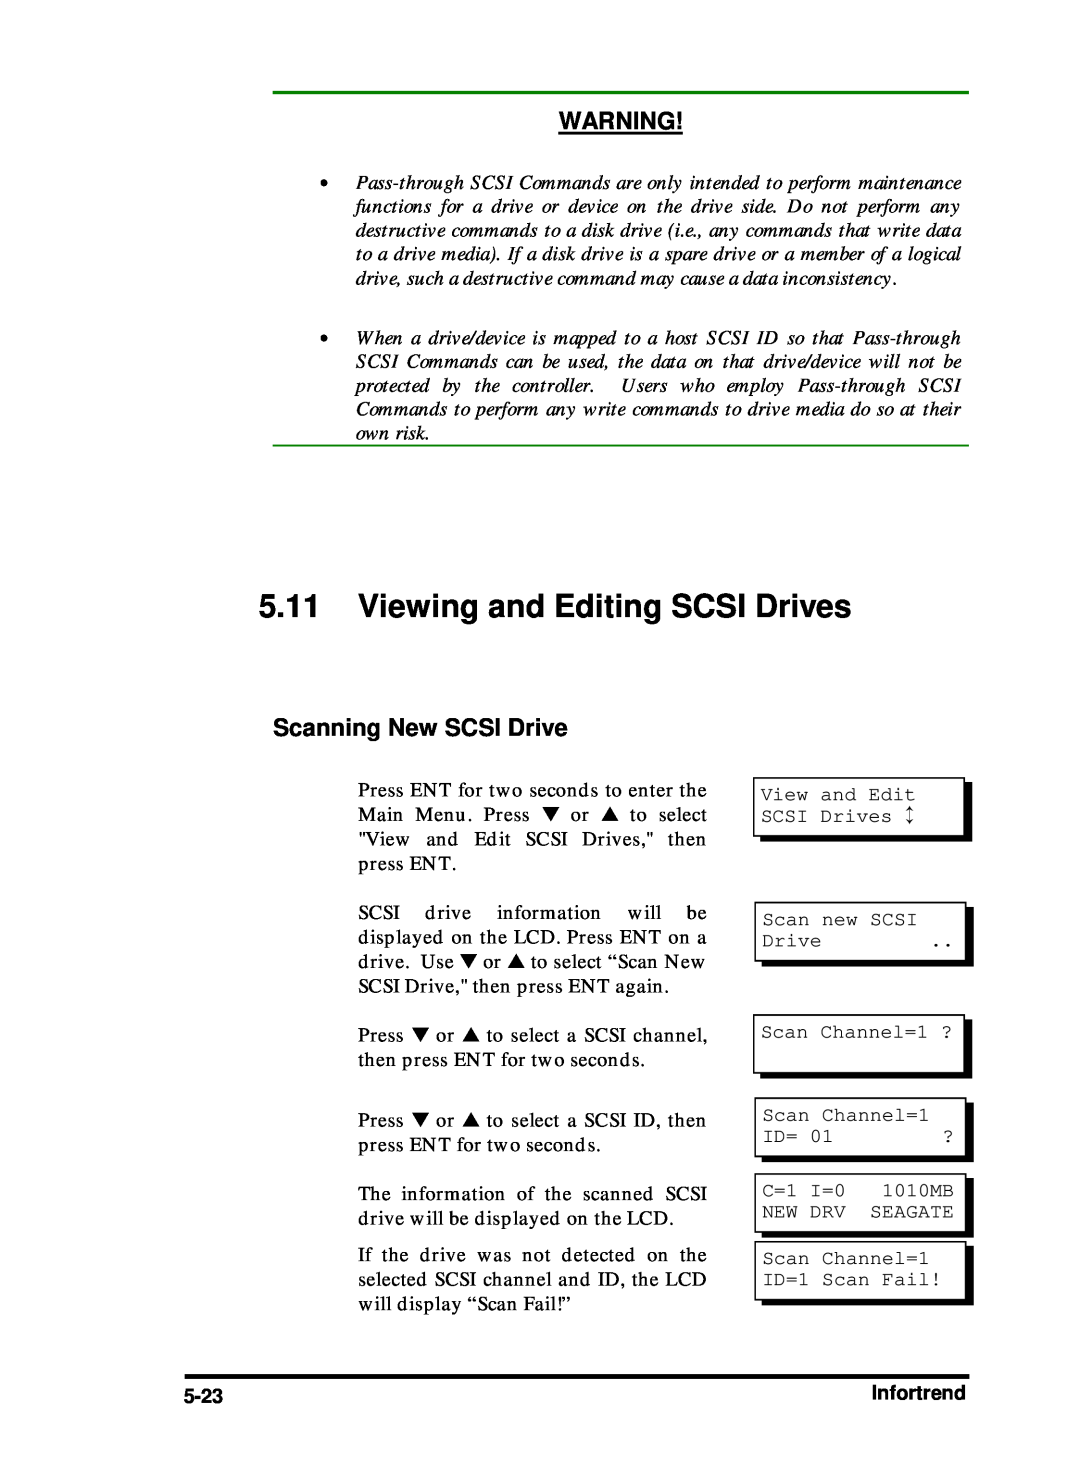 Compaq Infortrend manual Viewing and Editing SCSI Drives, Scanning New SCSI Drive 